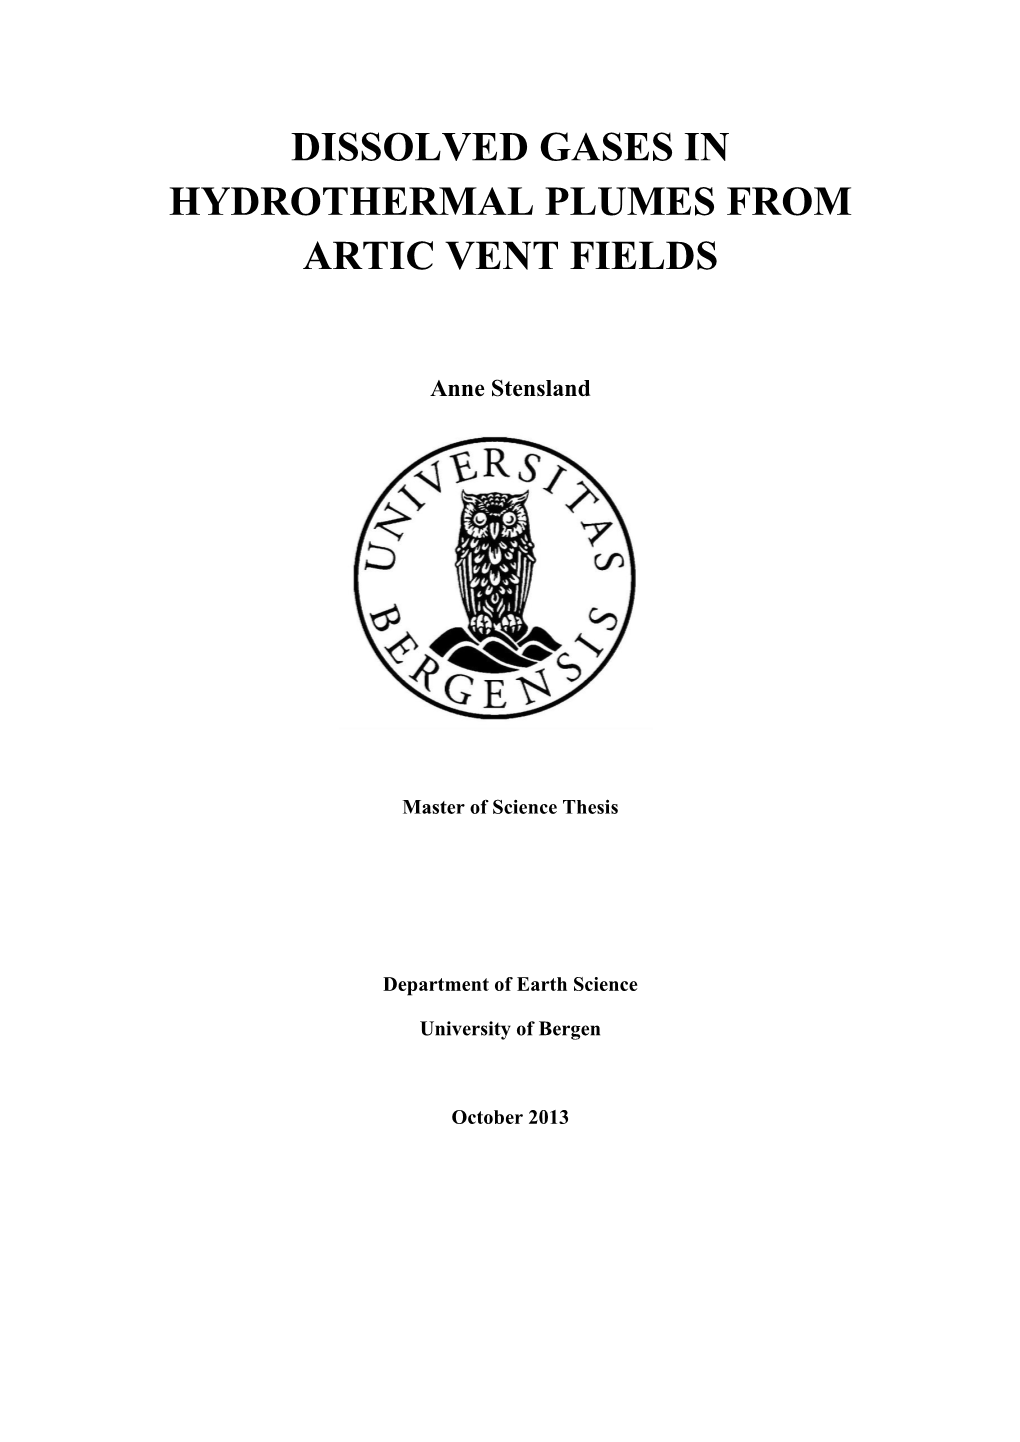 Dissolved Gases in Hydrothermal Plumes from Artic Vent Fields